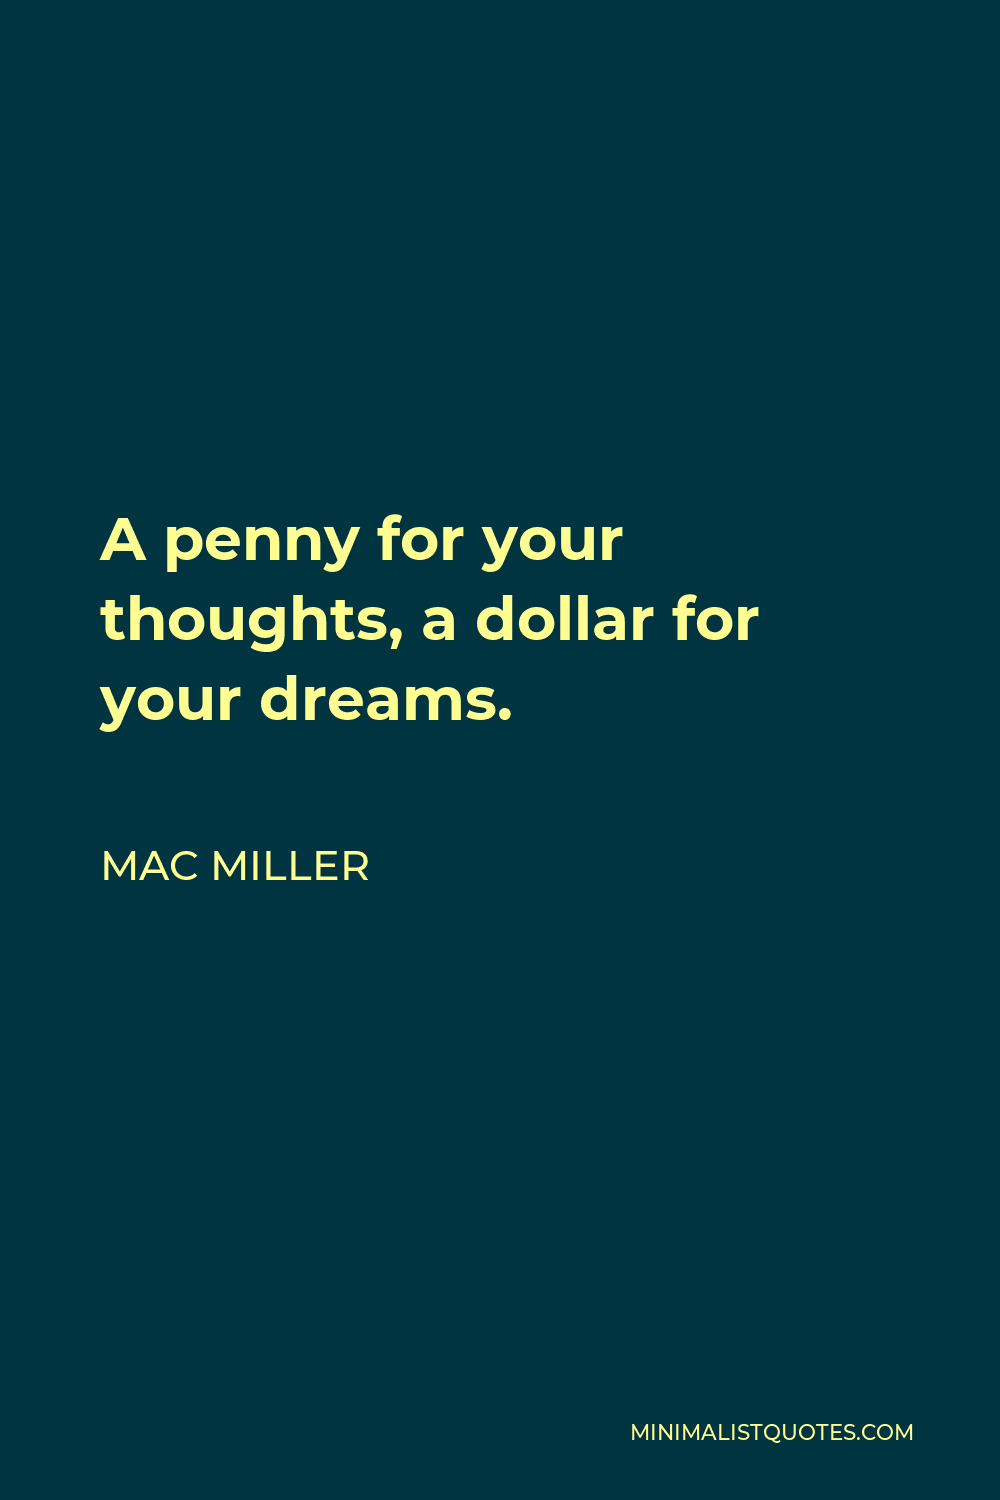 Mac Miller Quote - A penny for your thoughts, a dollar for your dreams.